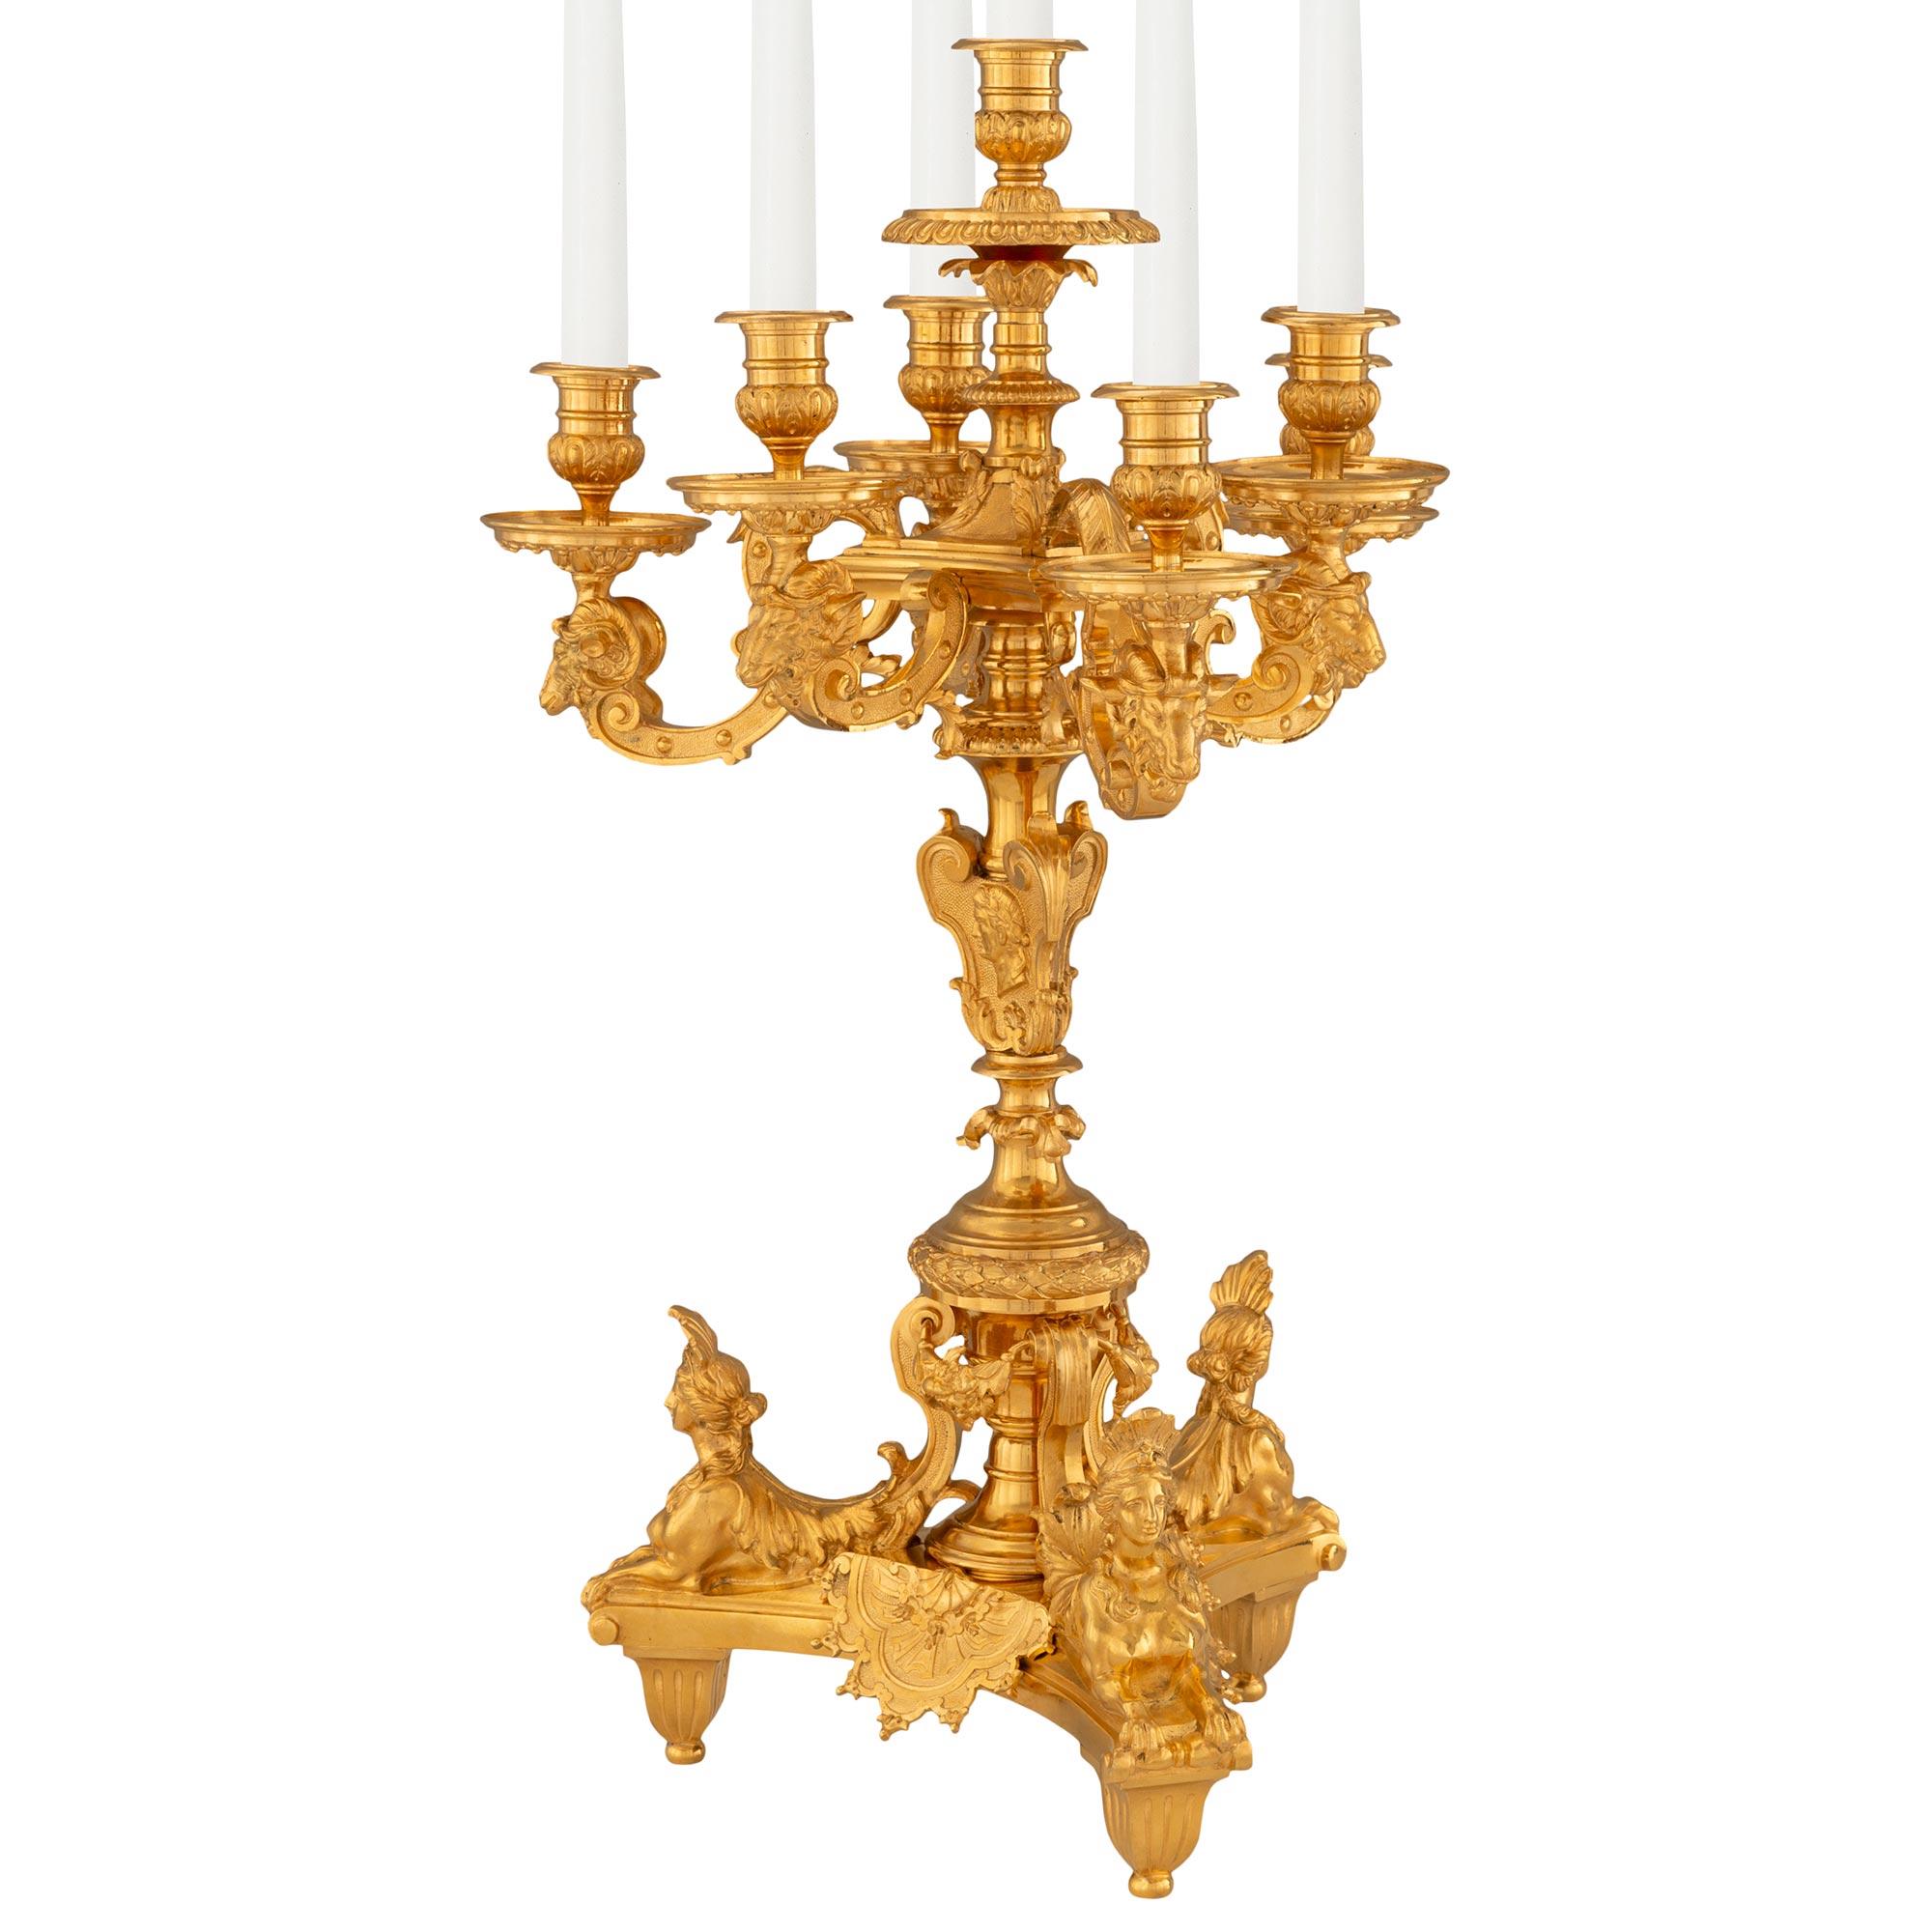 A striking and most impressive pair of French 19th century Louis XIV st. ormolu candelabras. Each seven arm candelabra is raised by a triangular base with three delicate tapered fluted feet below exceptional richly chased sphinges with acanthus